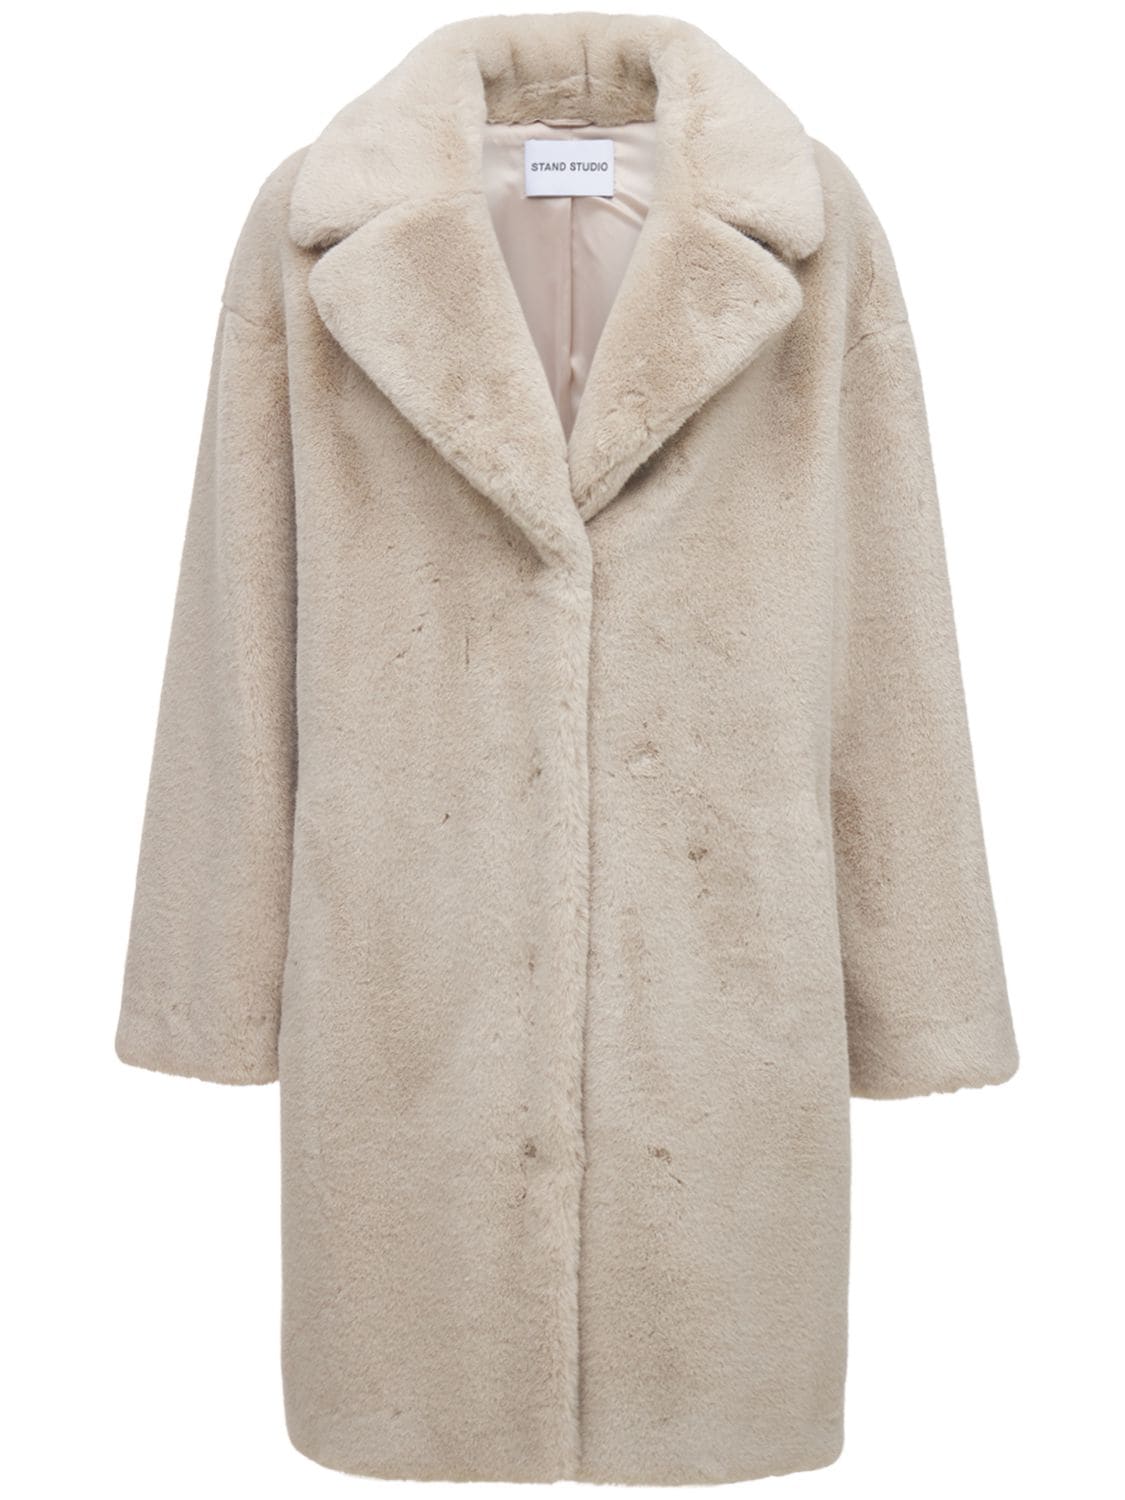 Stand Studio Camille Cocoon Soft Faux Fur Coat In Beige